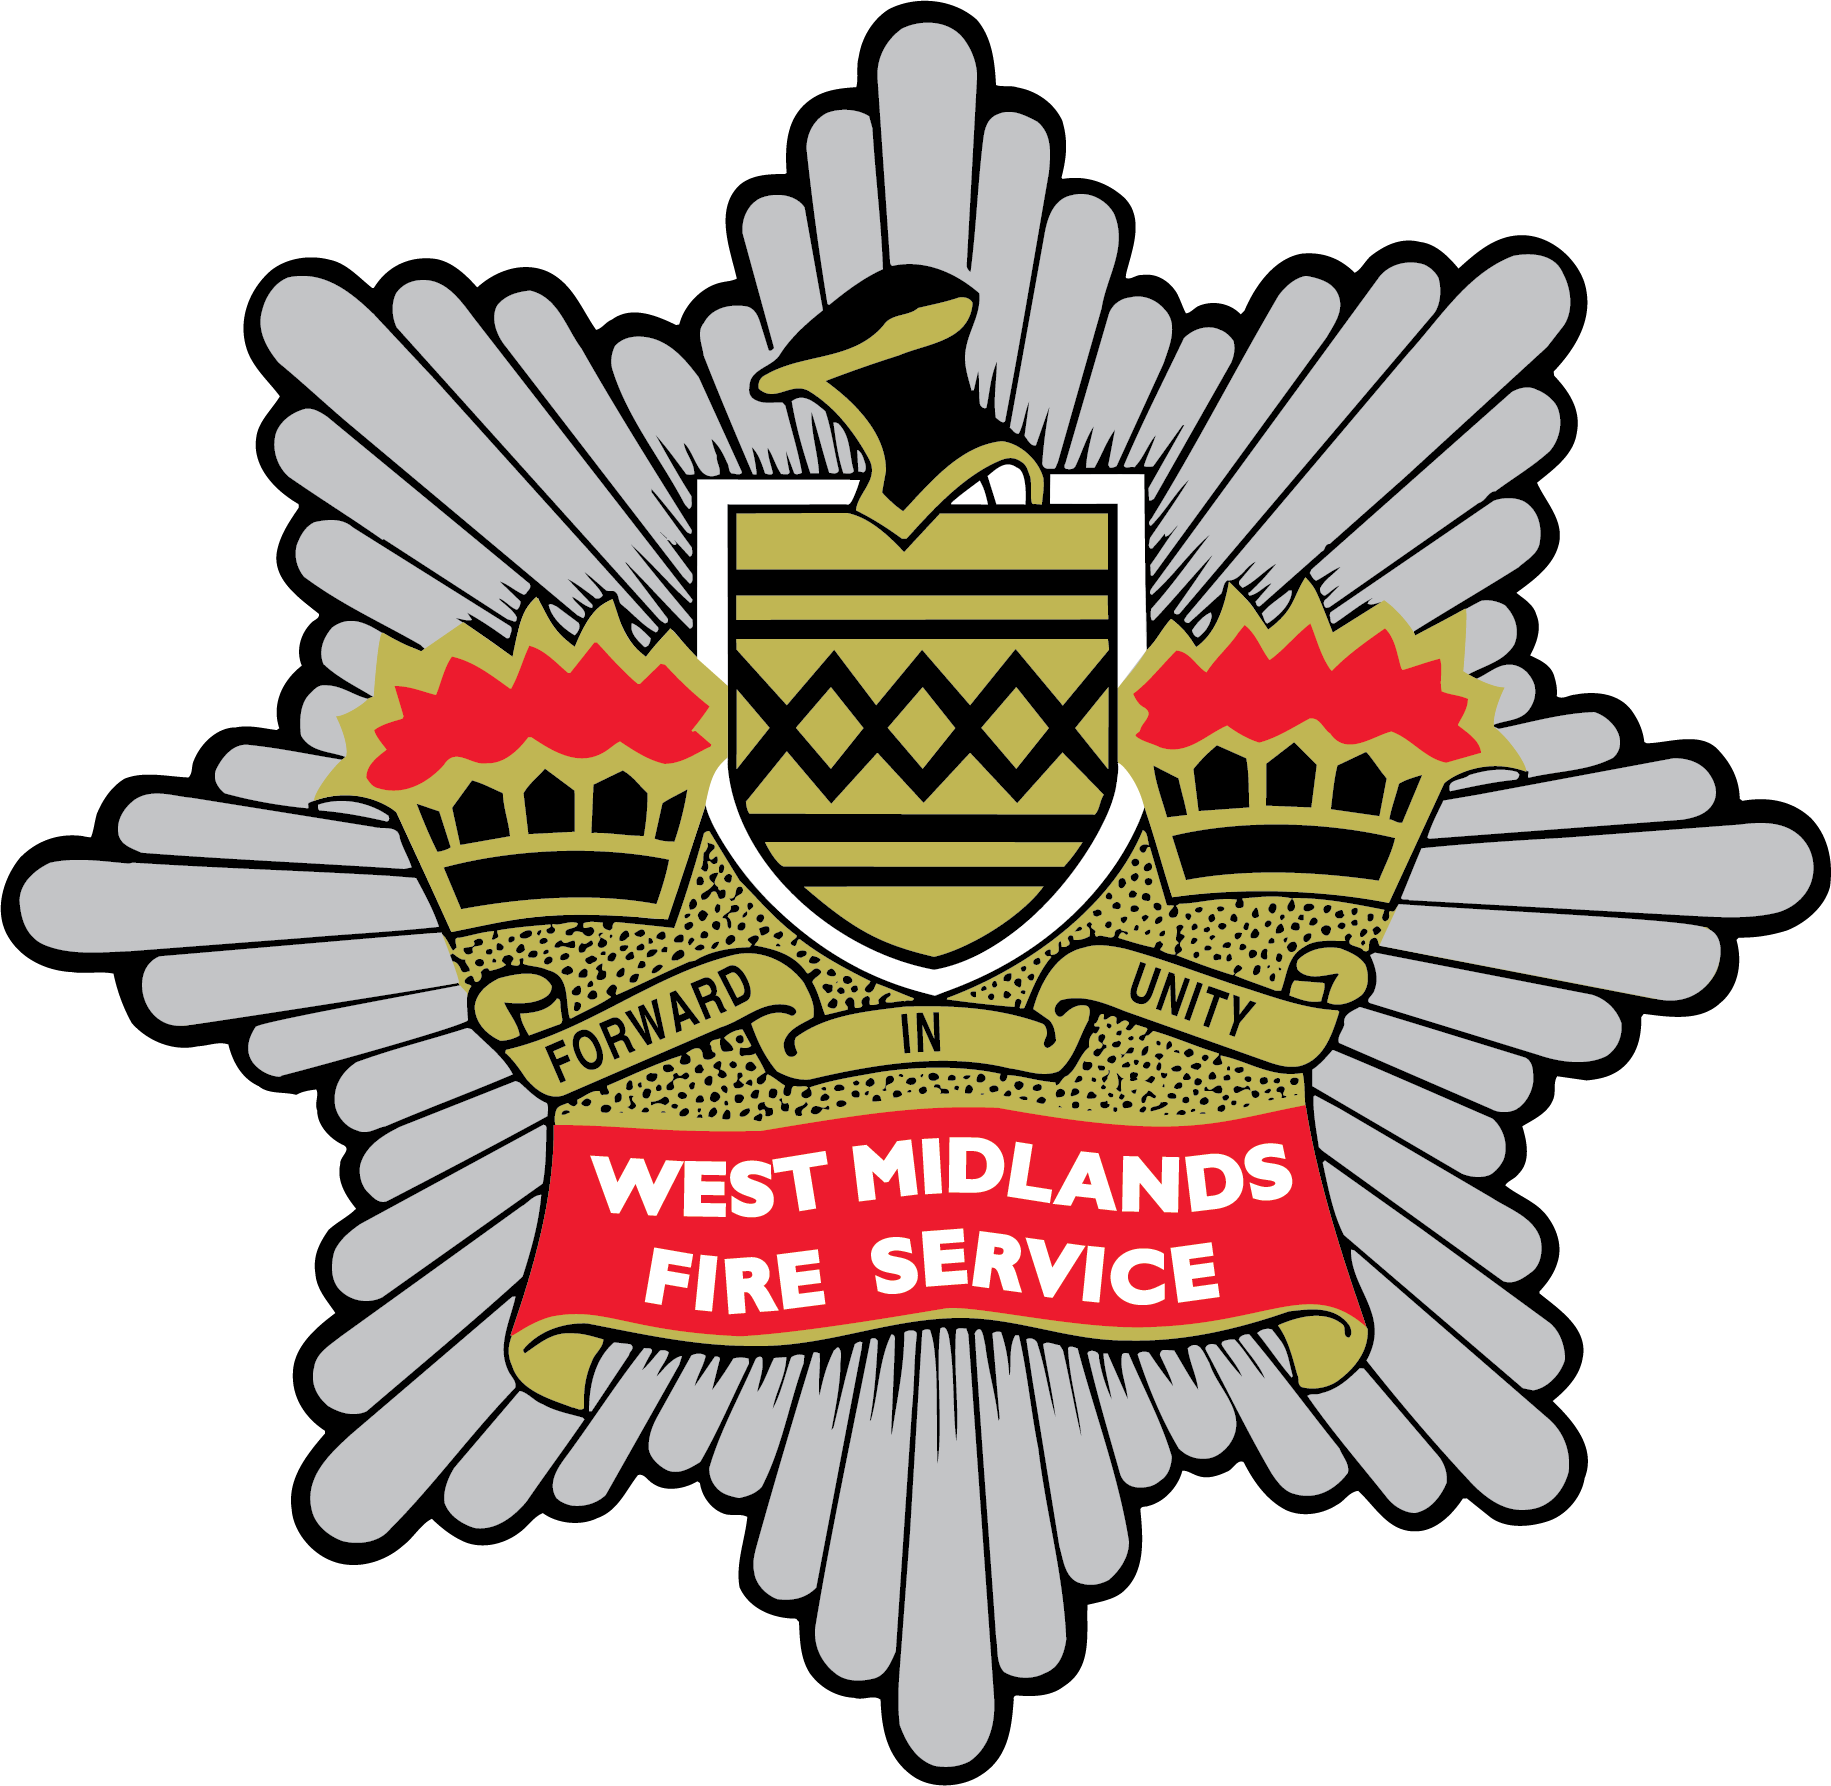 Fire Stations - West Midlands Fire Service